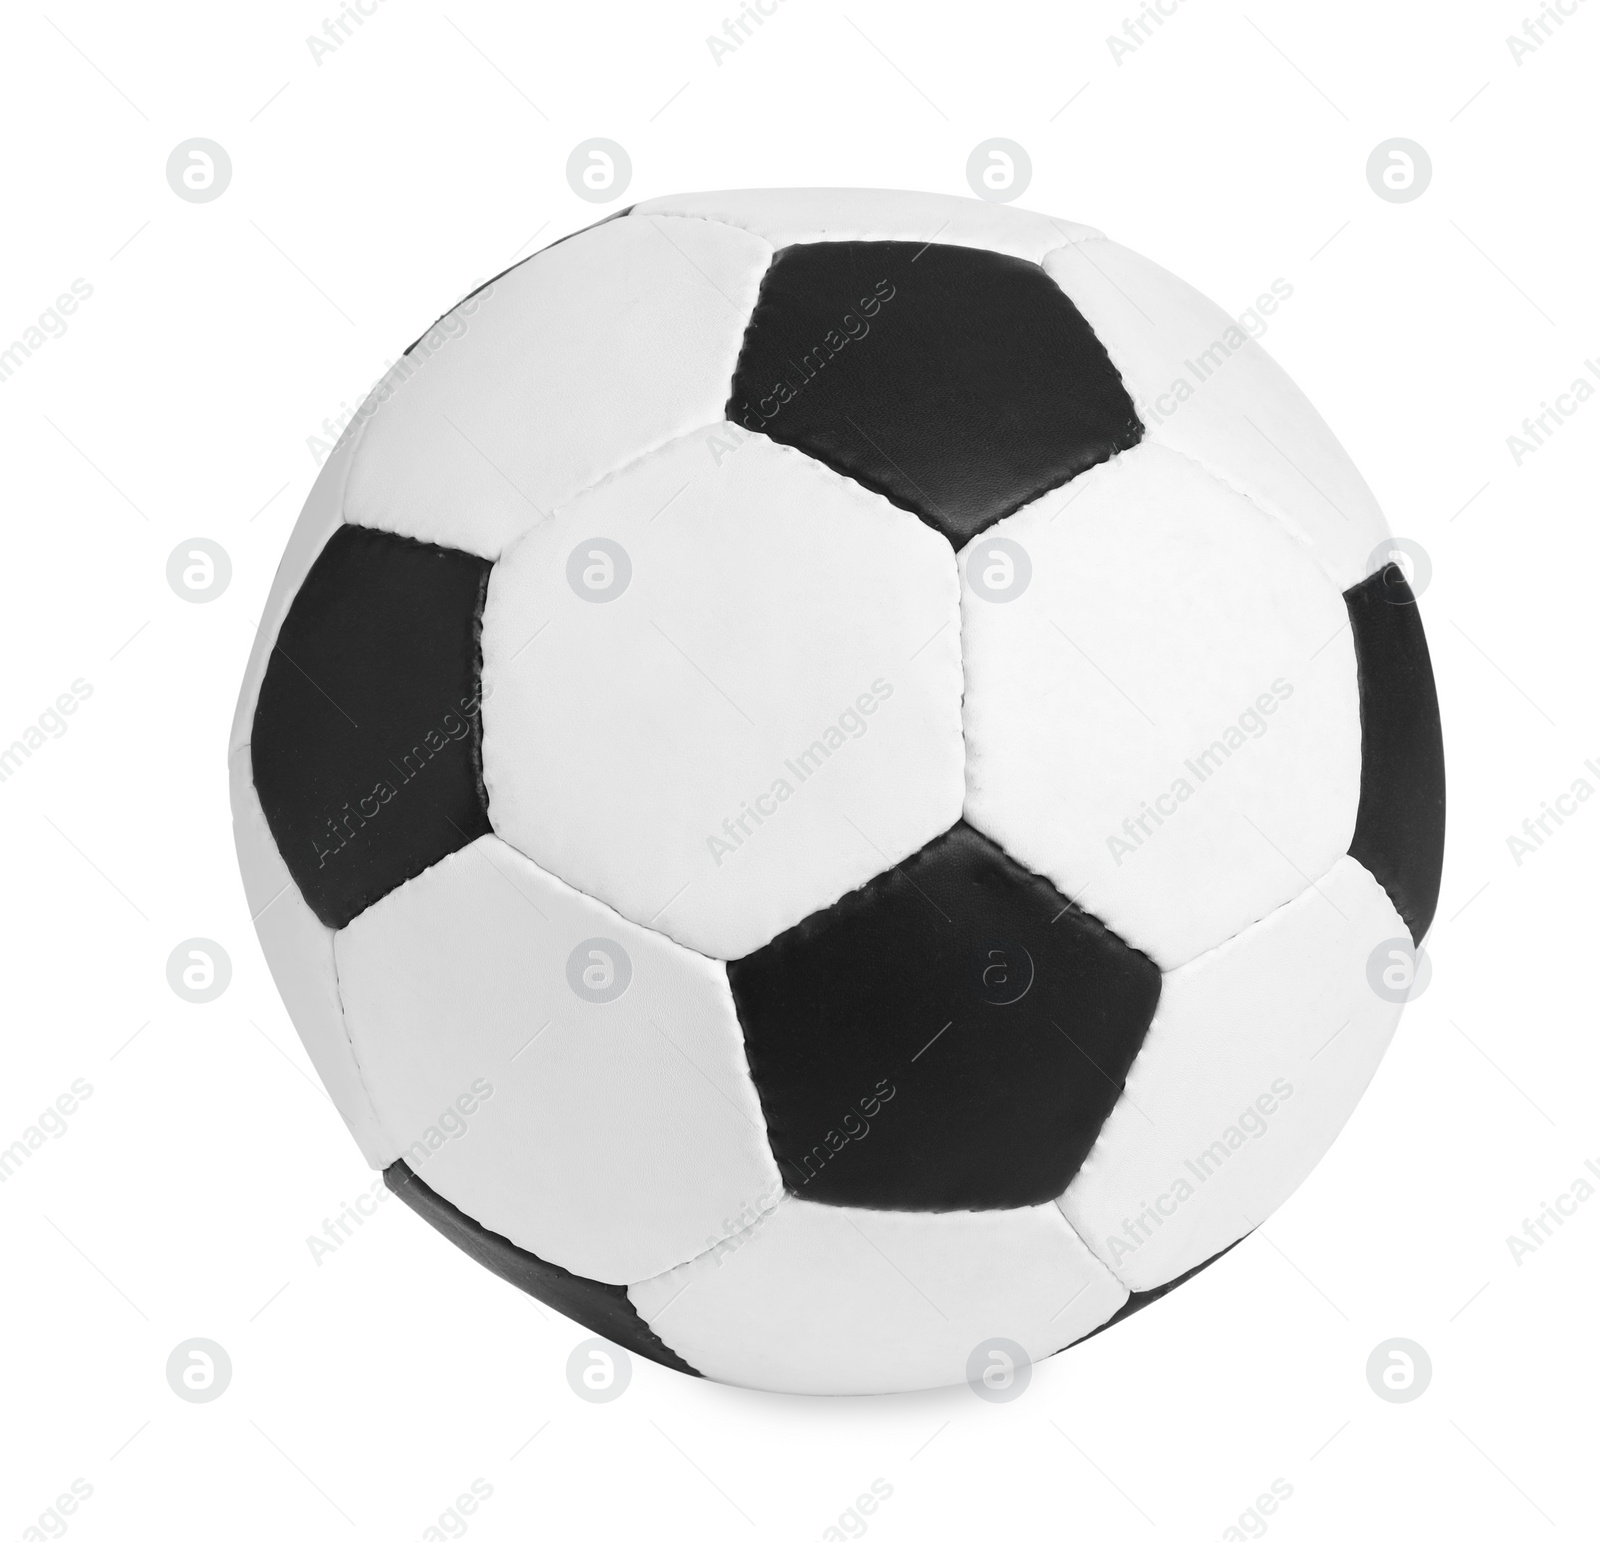 Photo of New soccer ball isolated on white. Football equipment